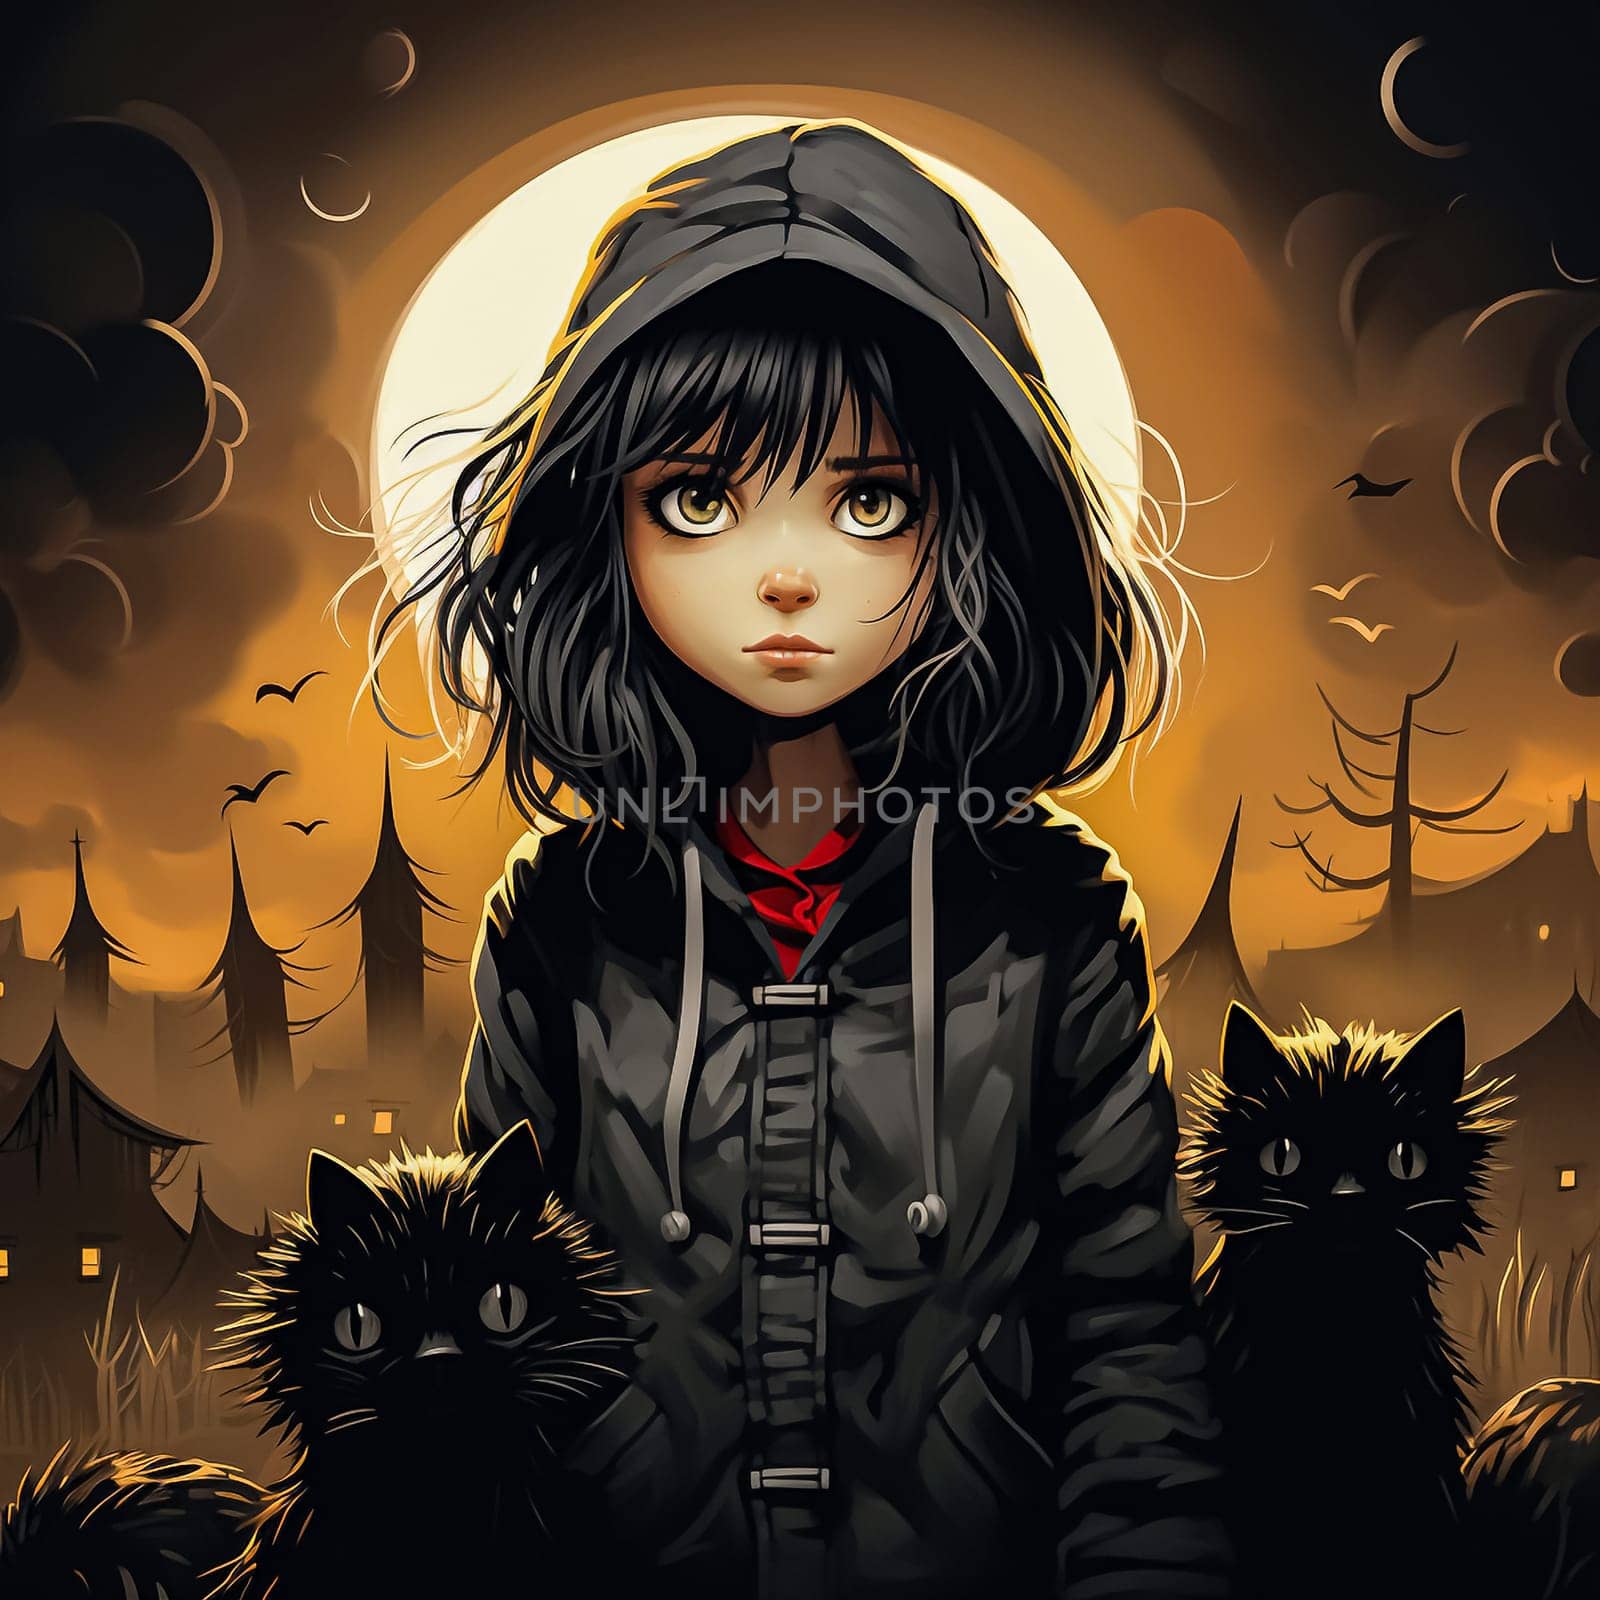 Girl with black hair, surrounded by cats by Alla_Morozova93